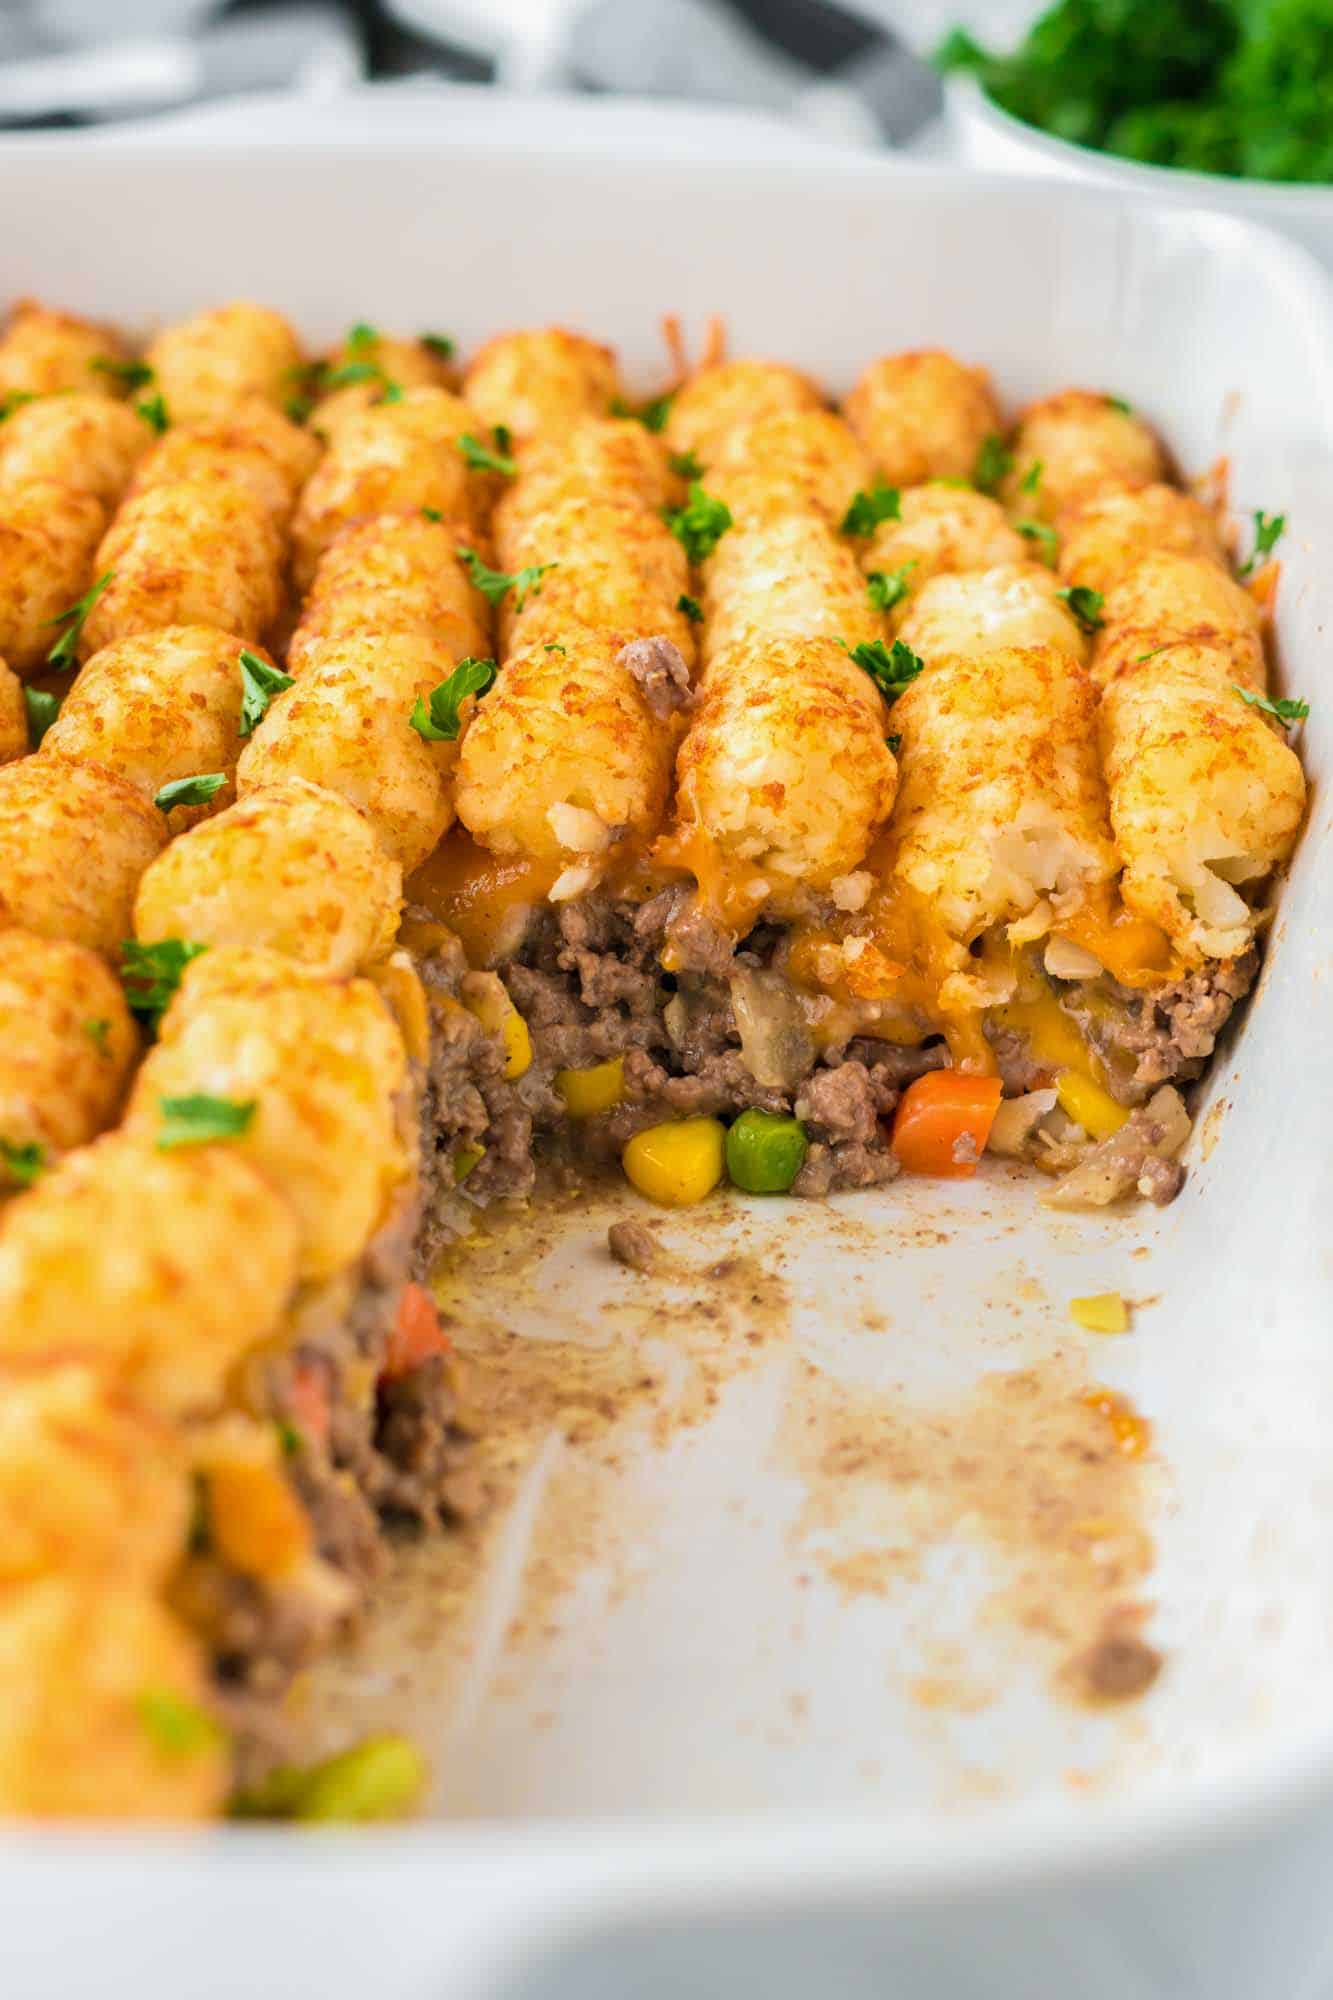 Tater tot casserole showing the layers